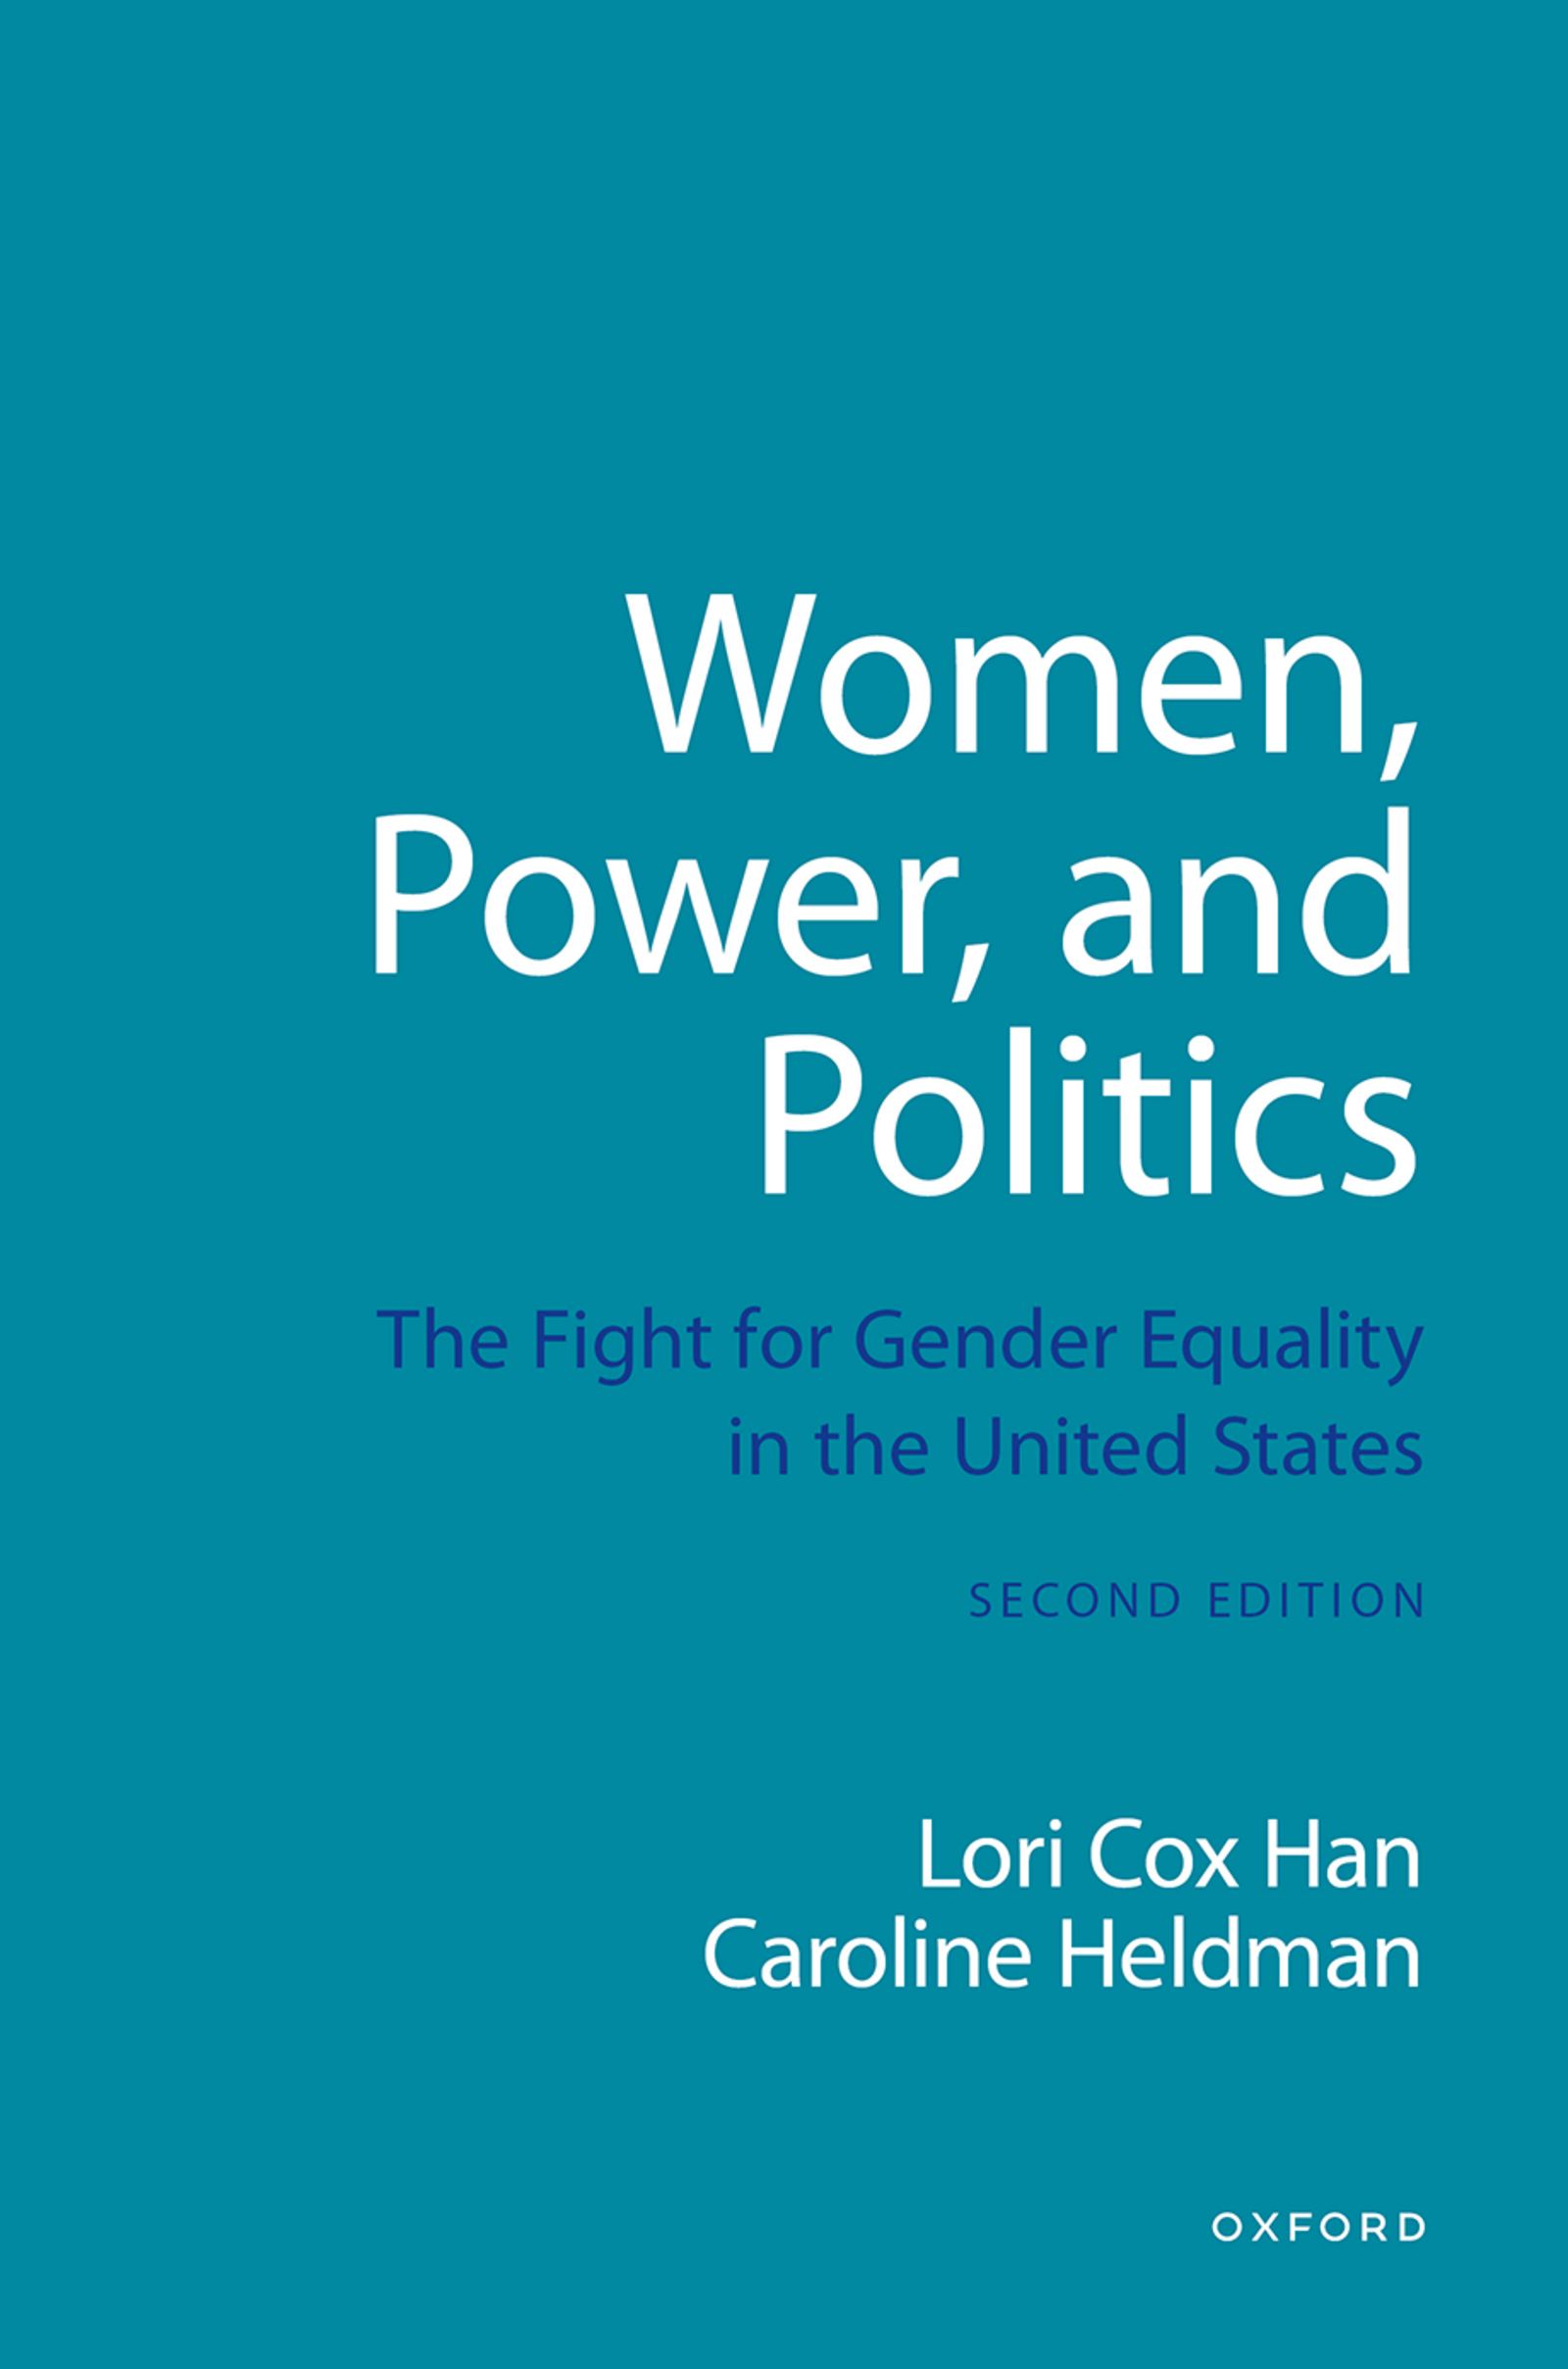 180 Day Access Women, Power, and Politics